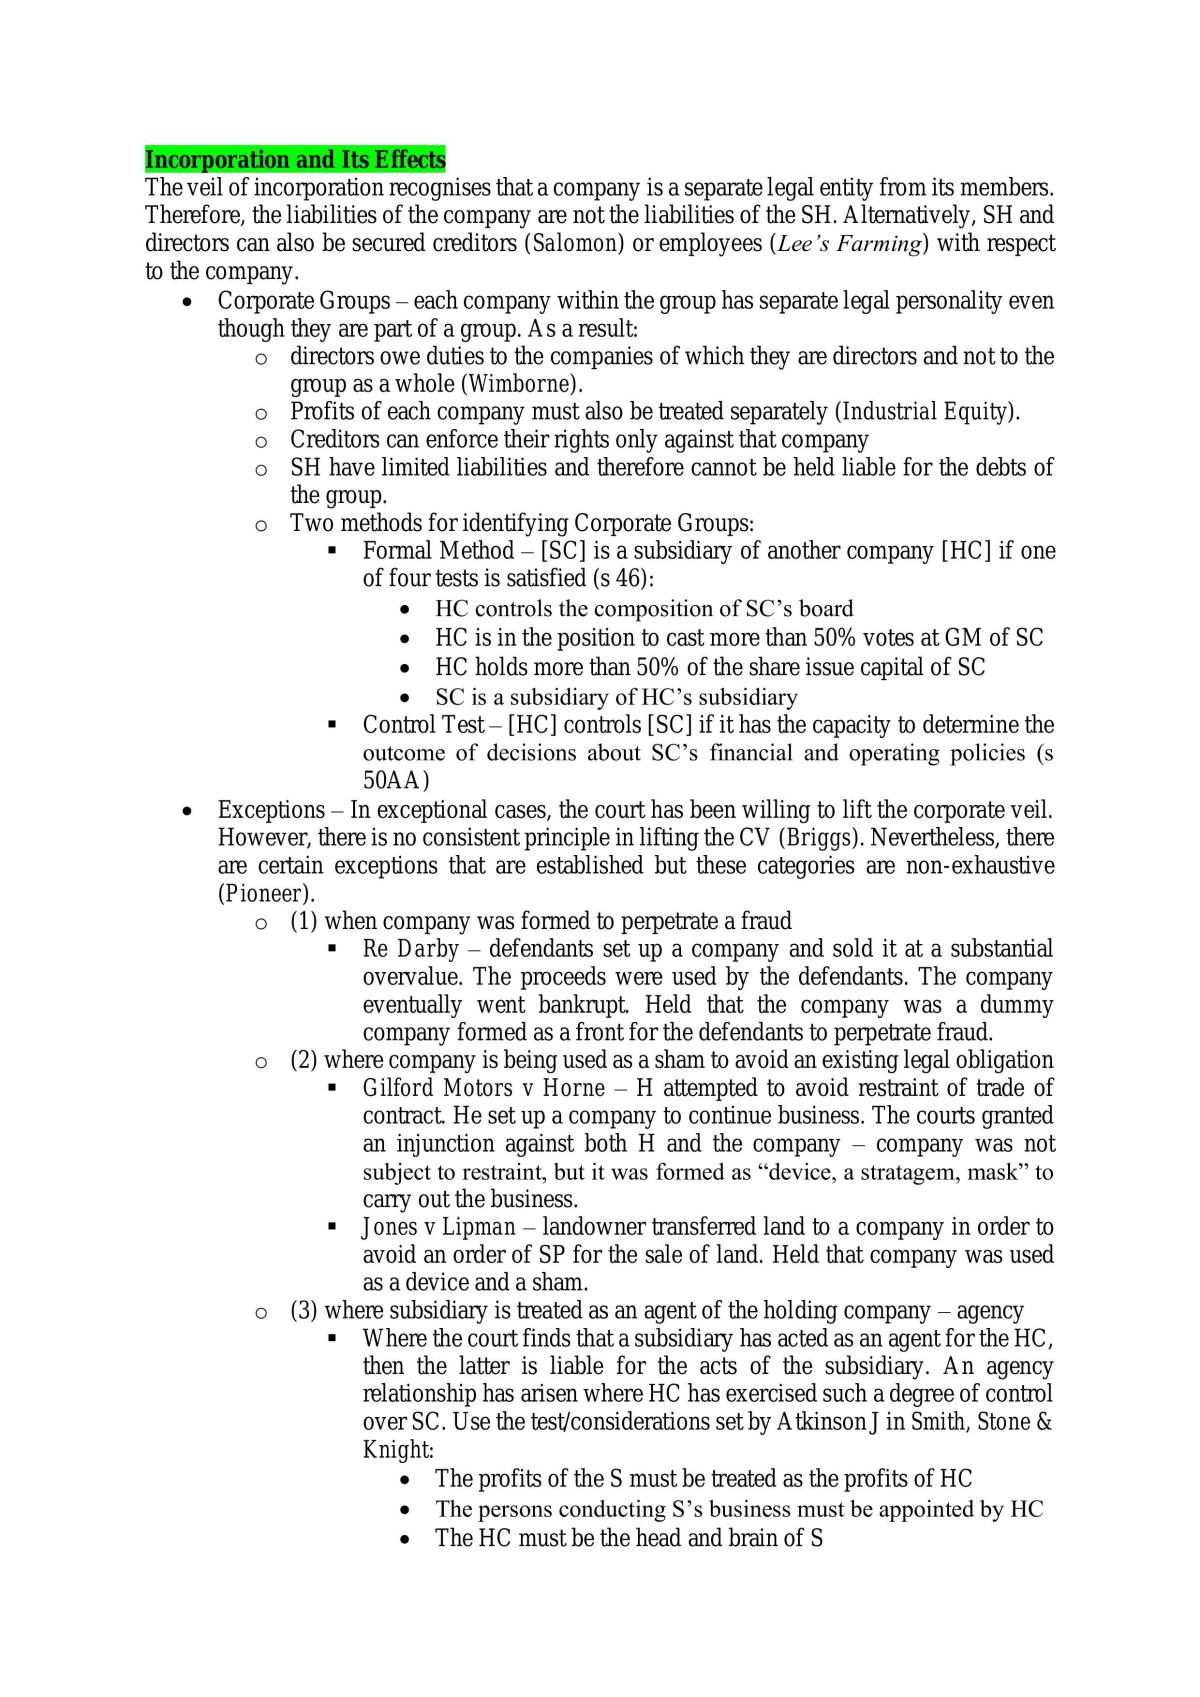 LAW5011 - Company Law - HD notes - Page 1